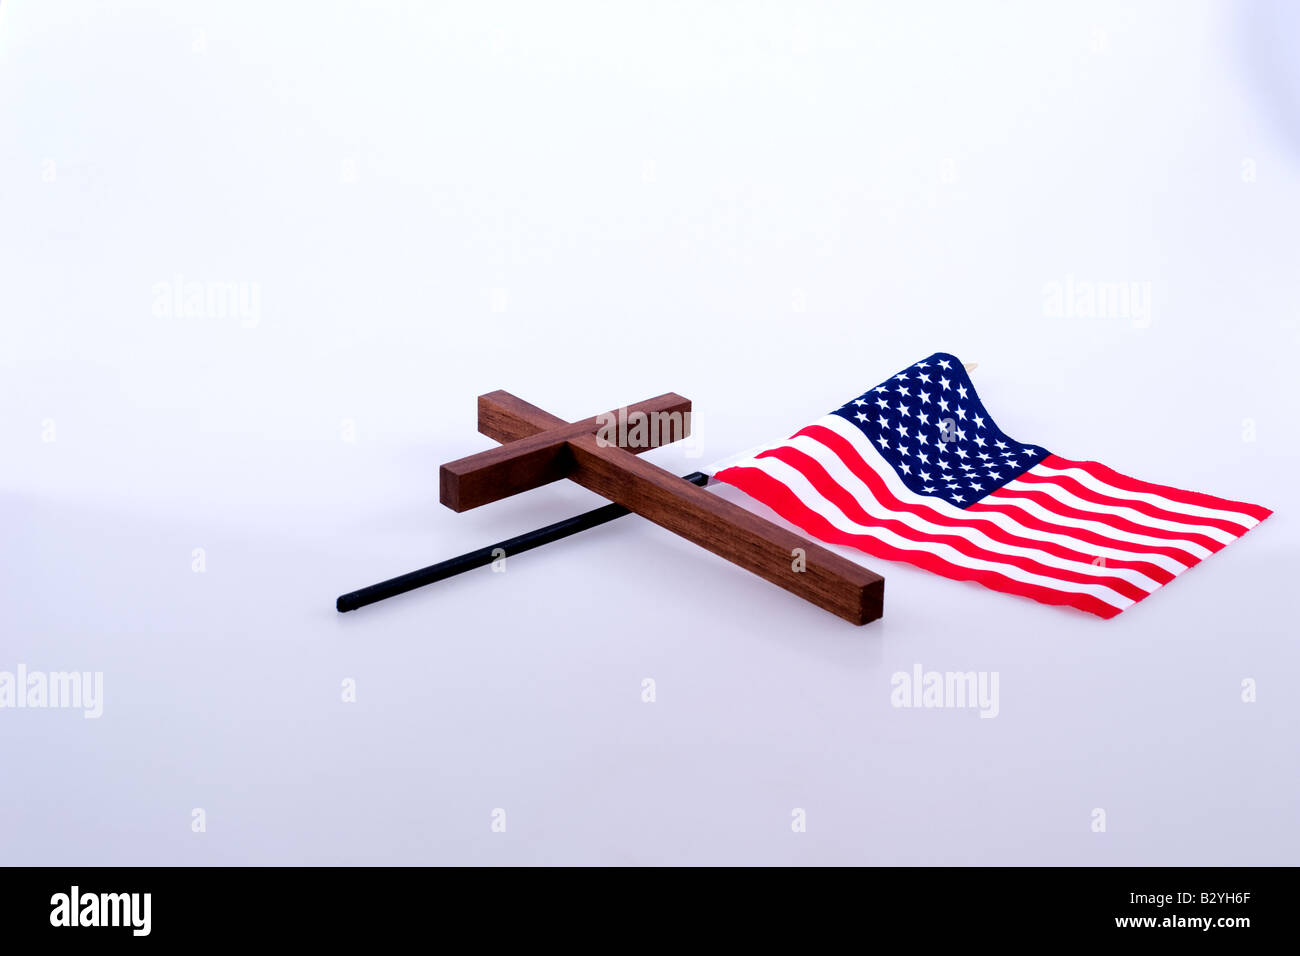 Christian cross and a small American flag Stock Photo